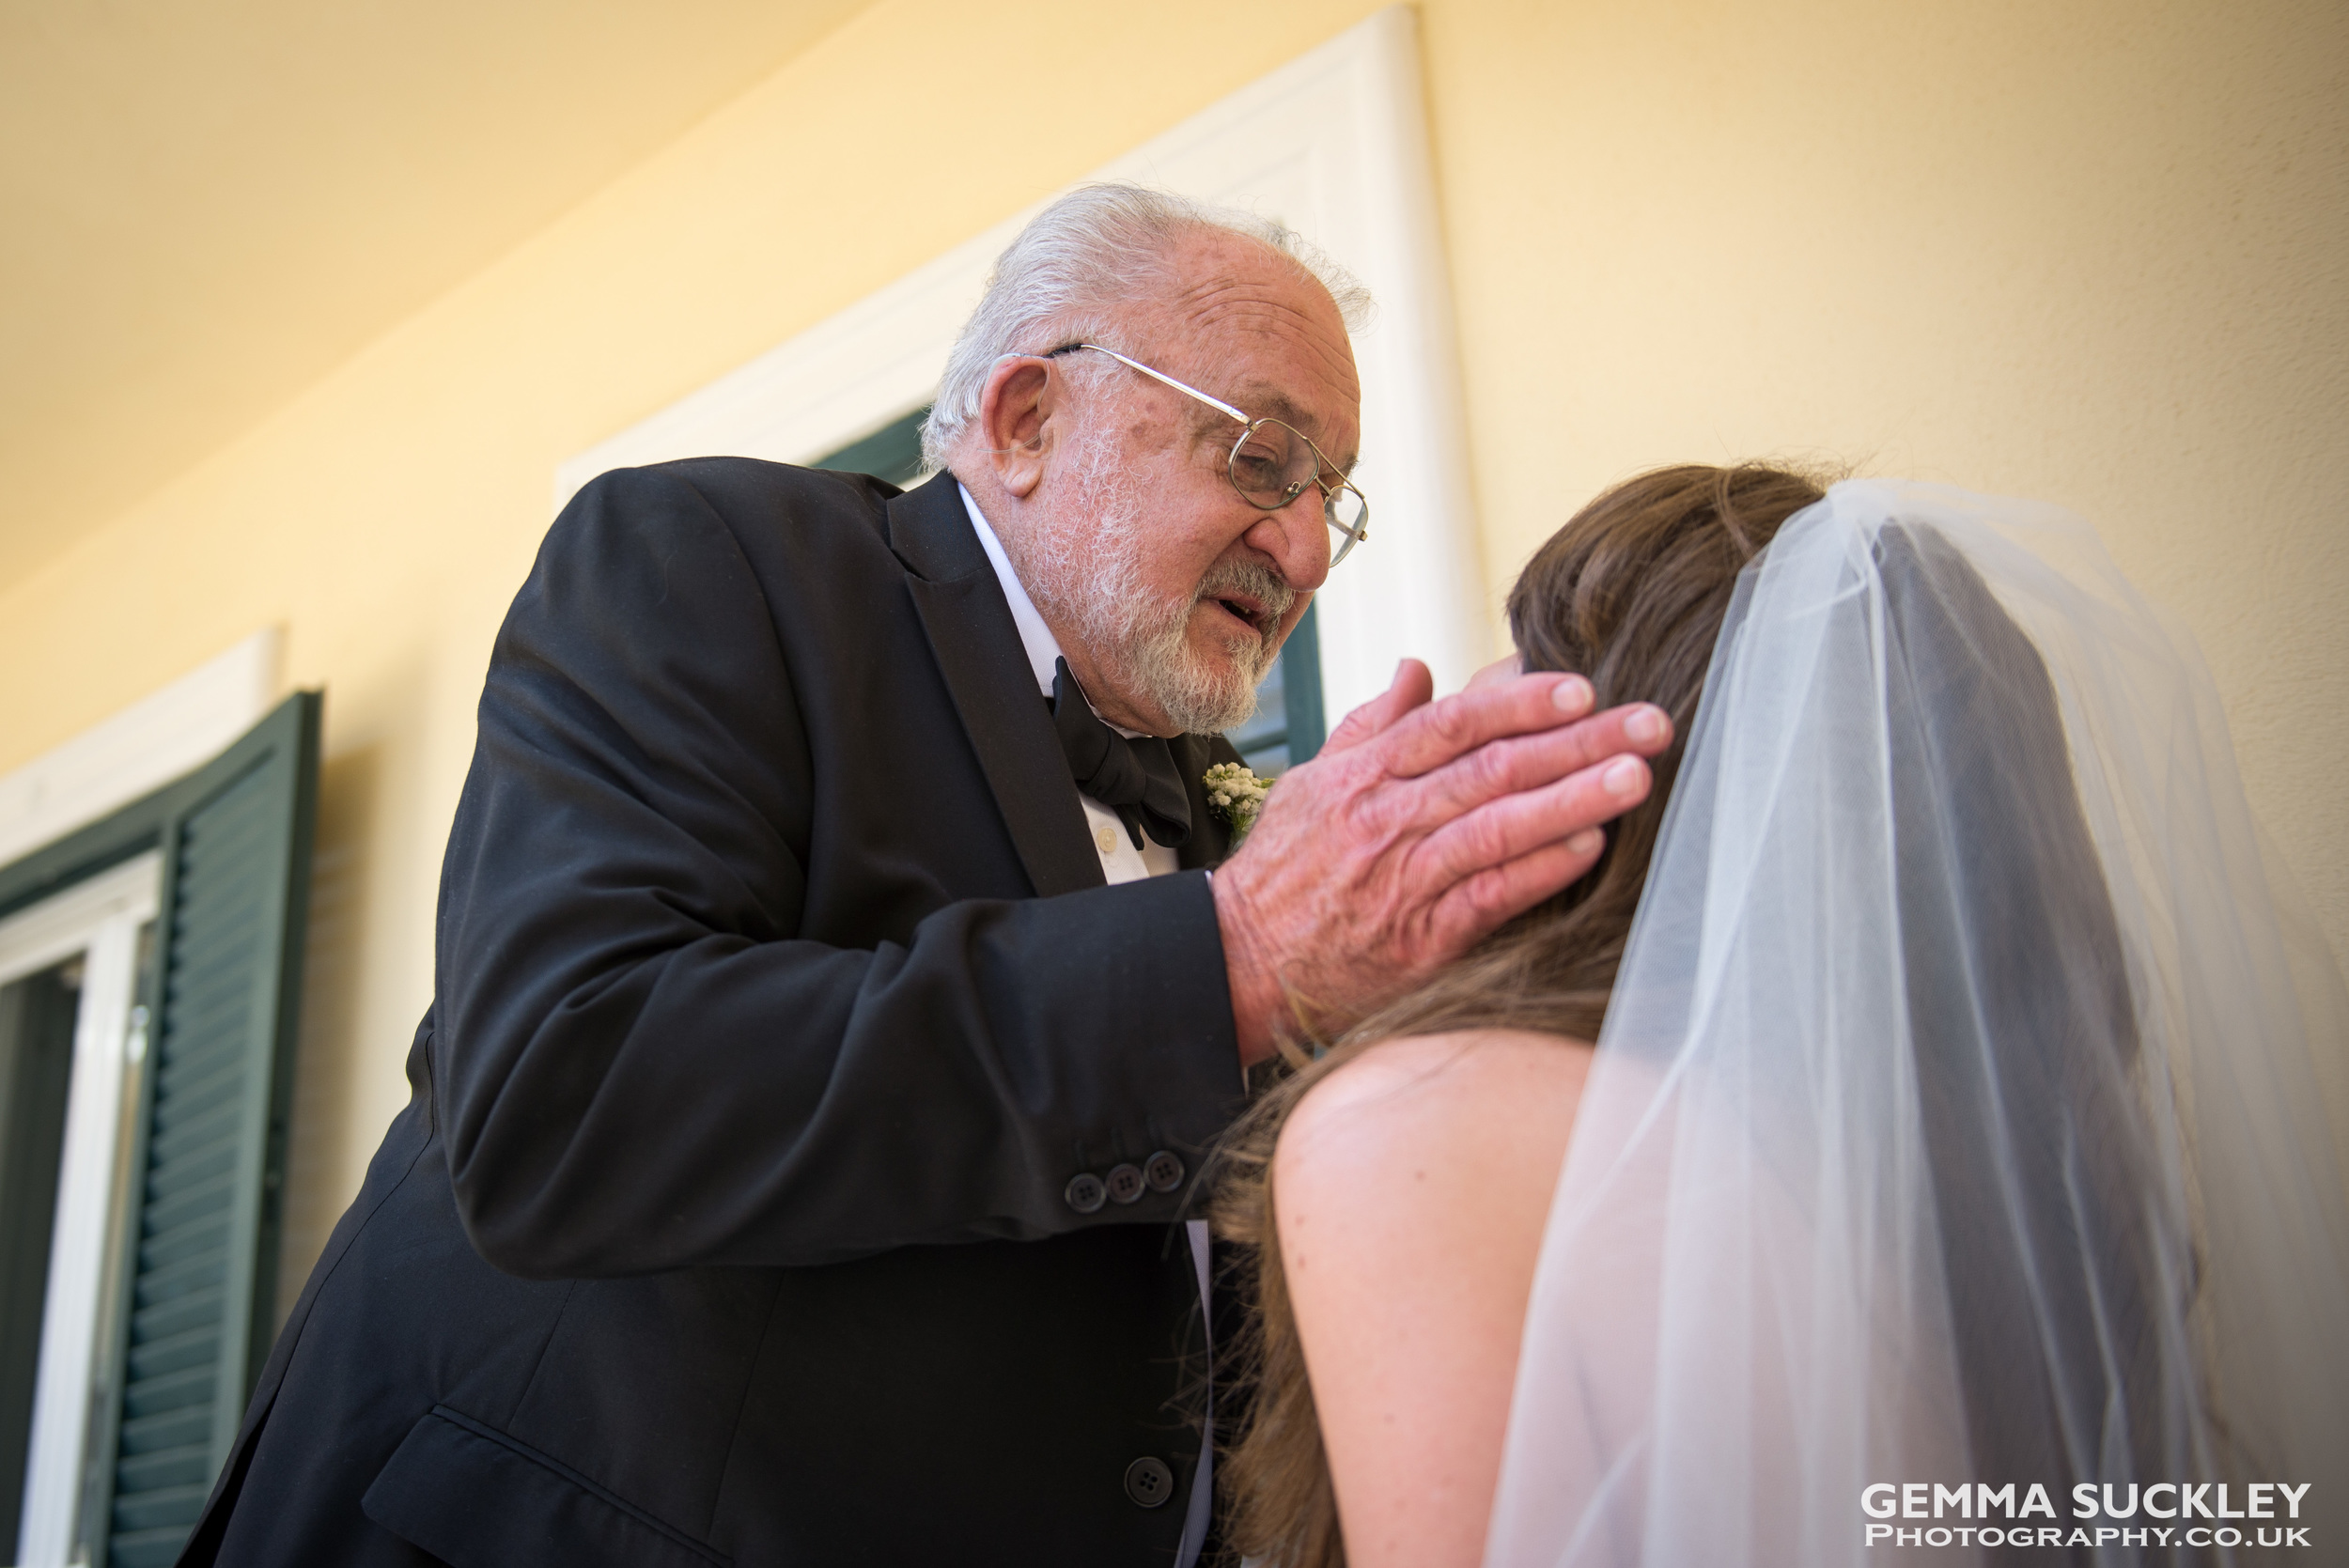 father-of-the-bride-1st-look-gemma-suckley-photography.jpg